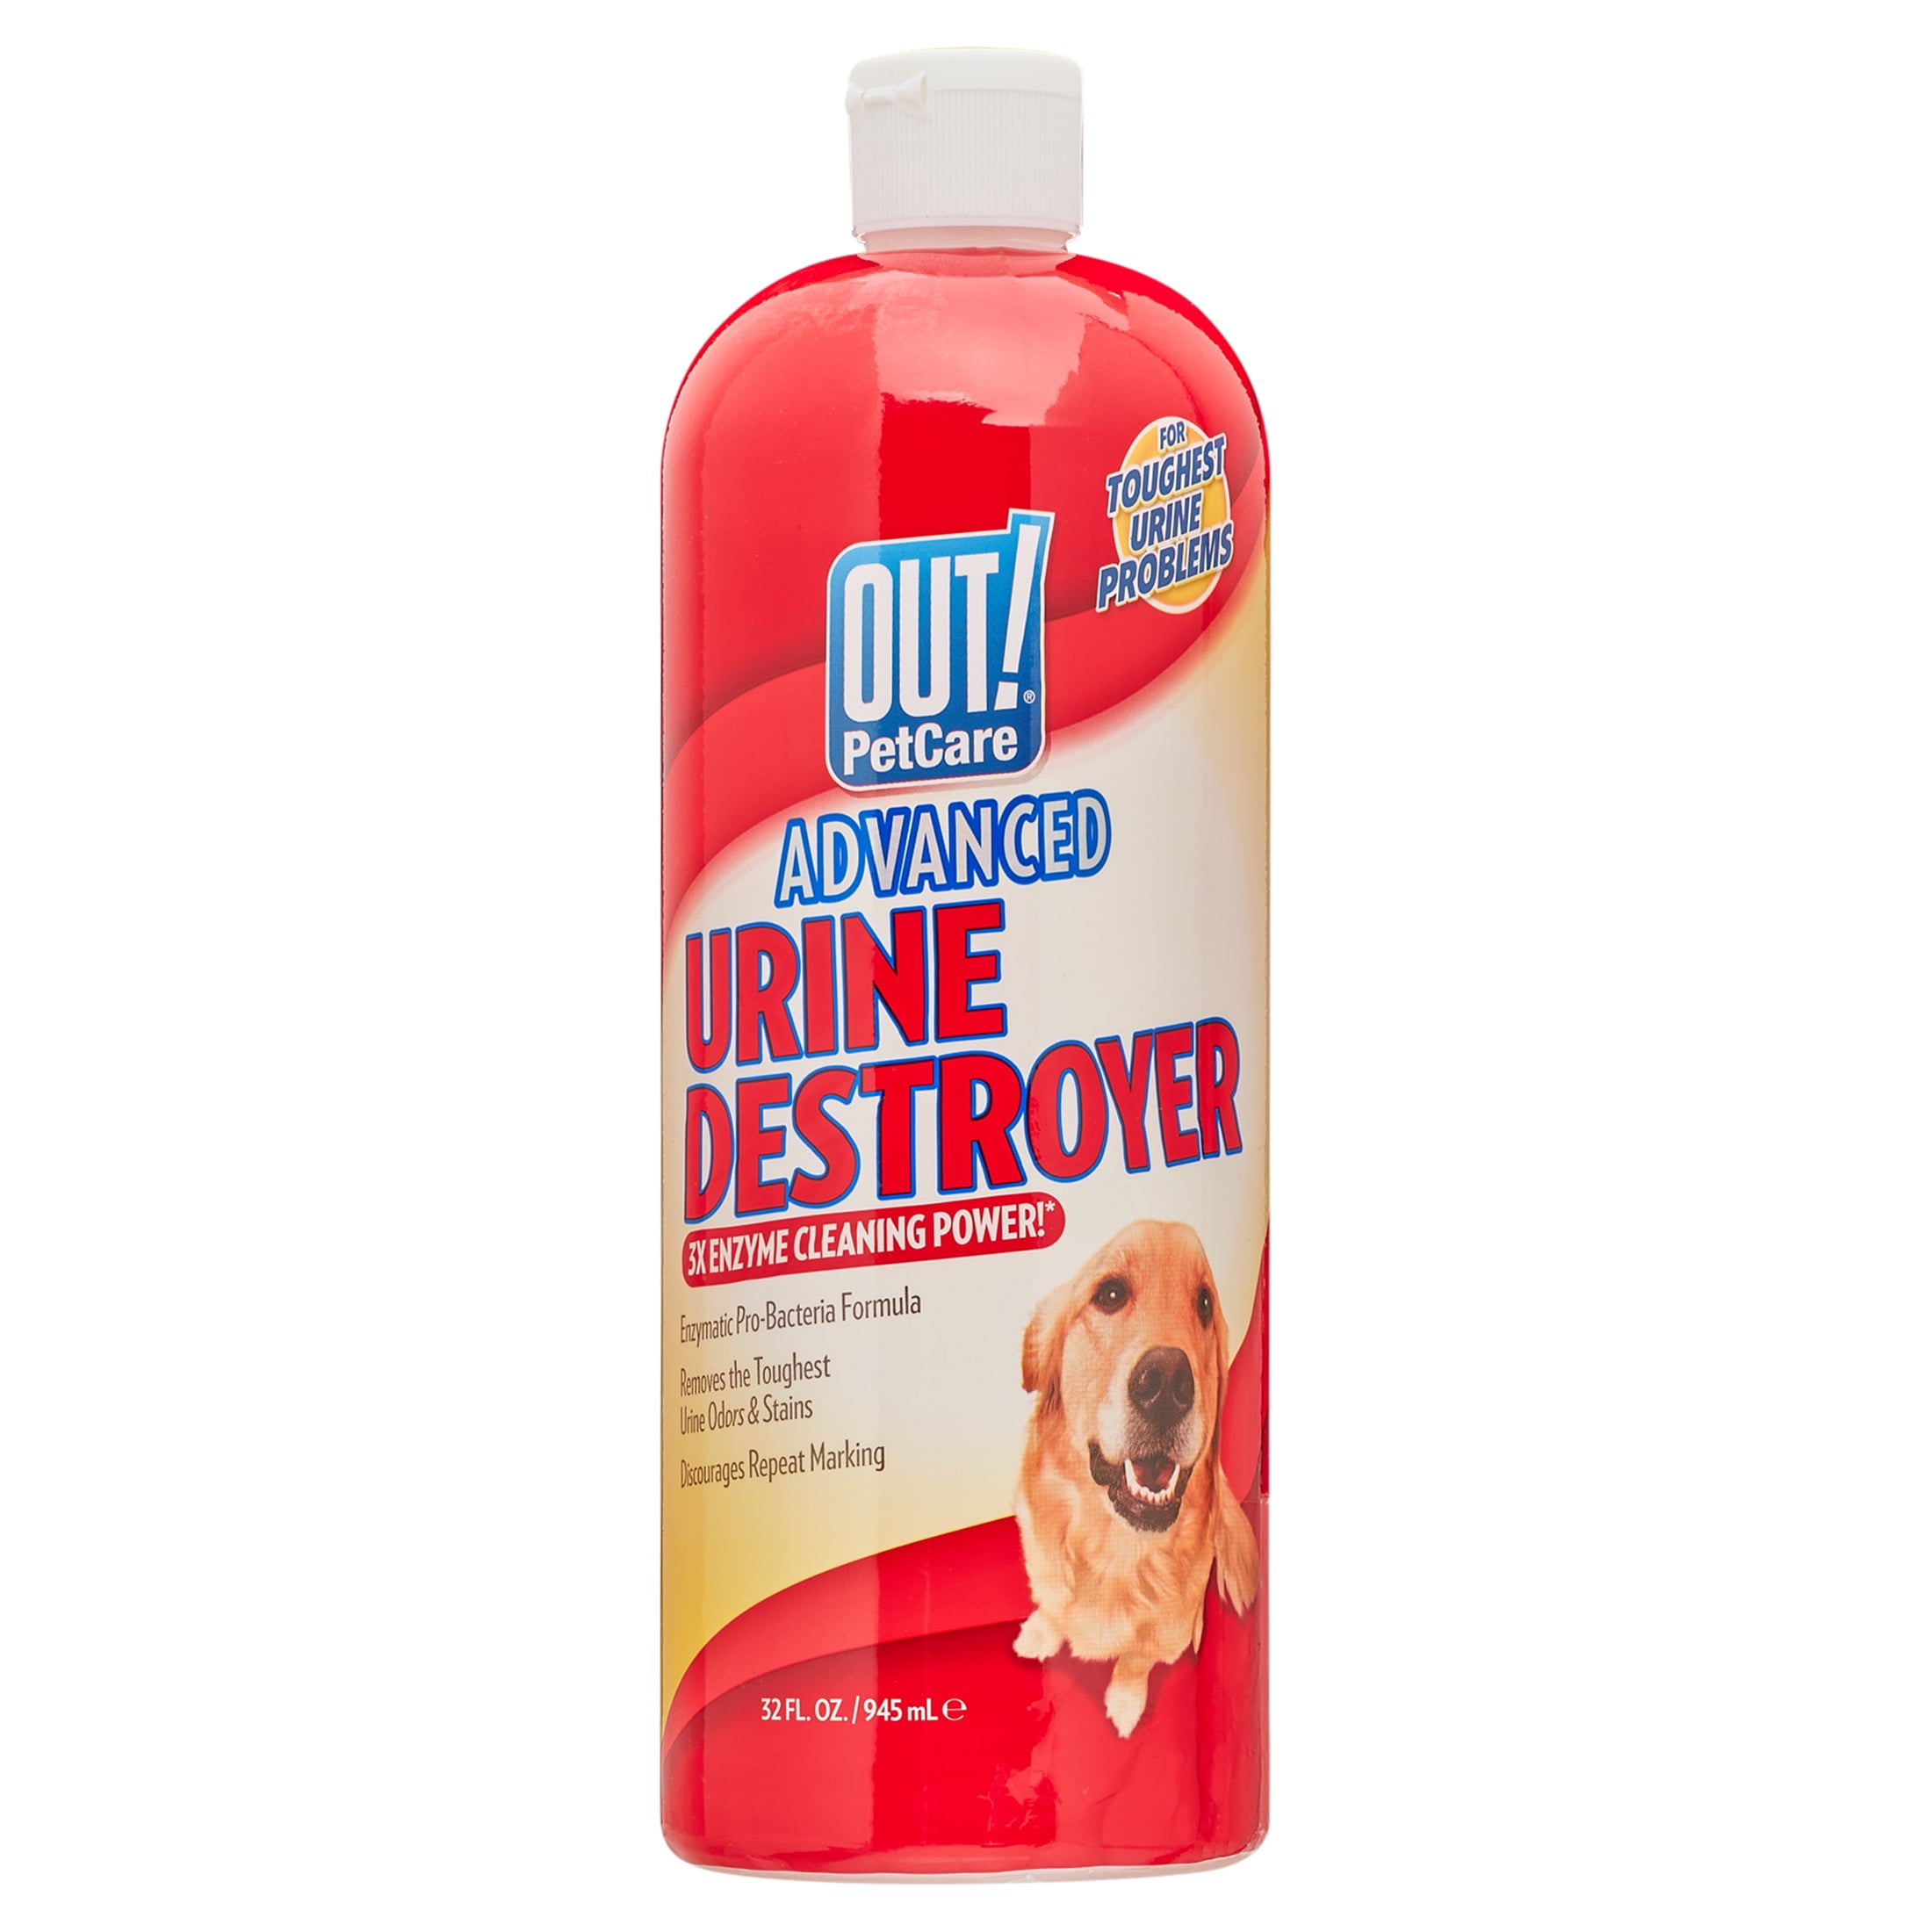 Cleaning and Pets: How to Get Rid of Odors and Stains